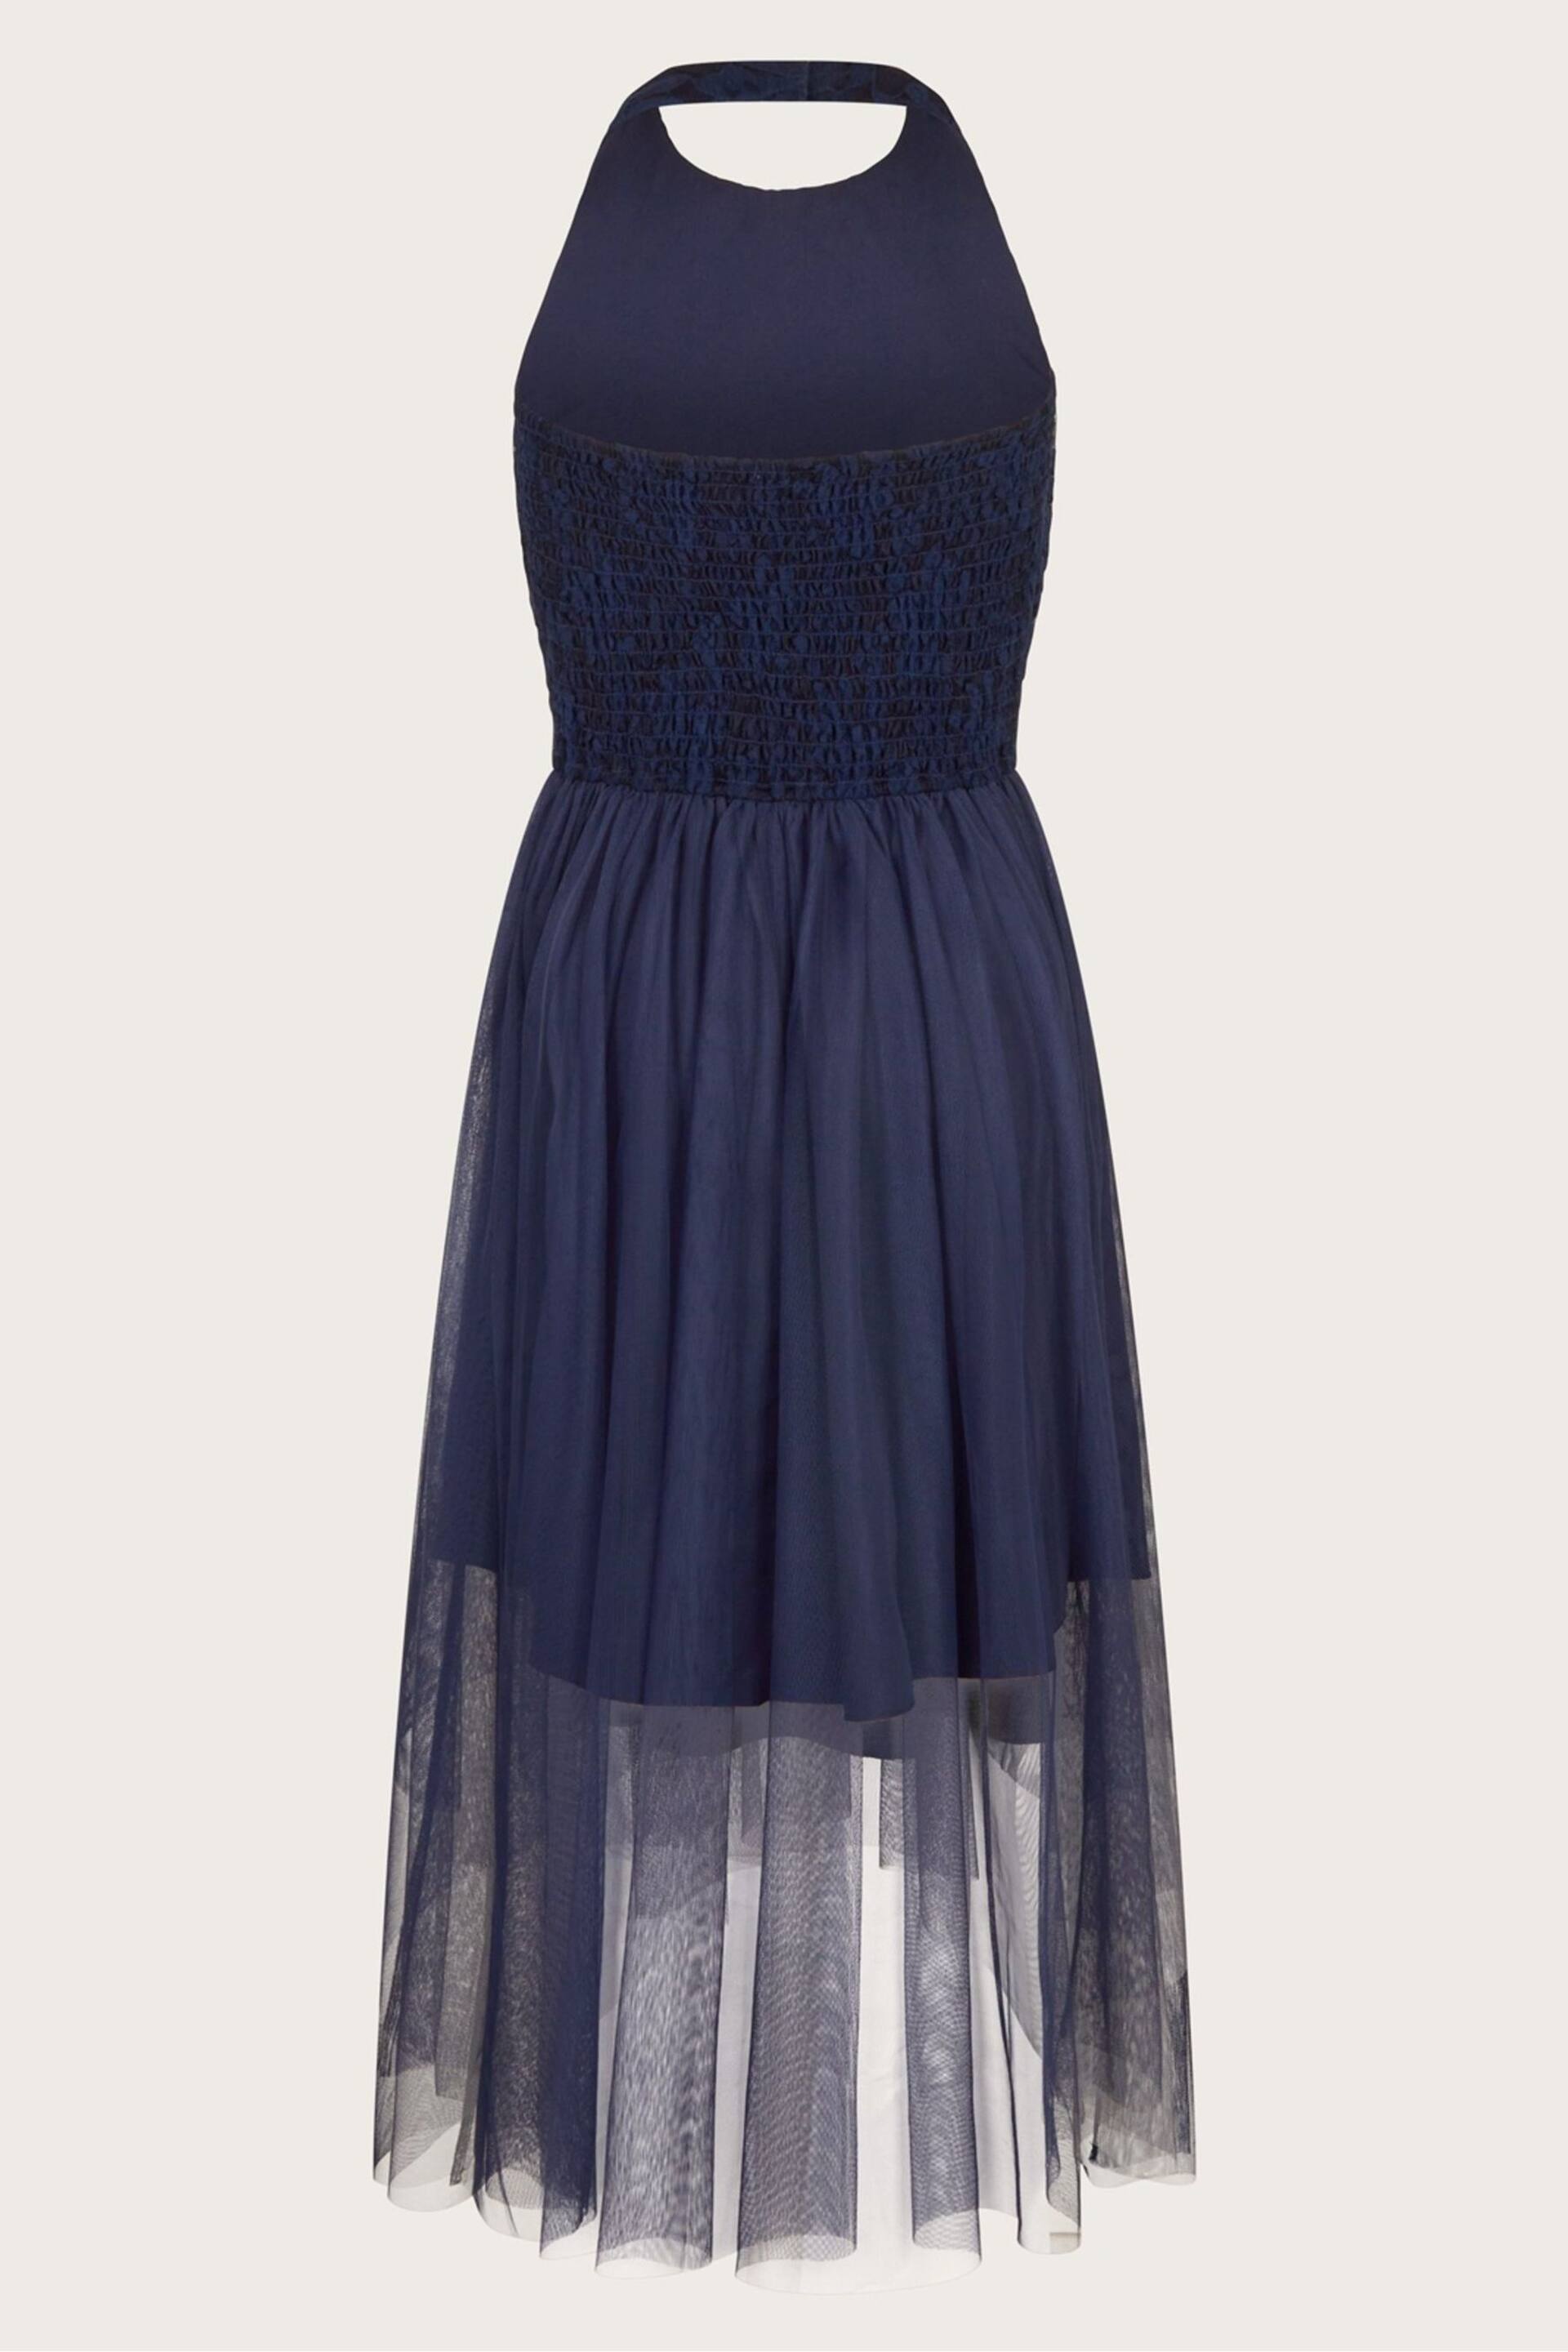 Monsoon Blue Hayley Lace Prom Dress - Image 2 of 3